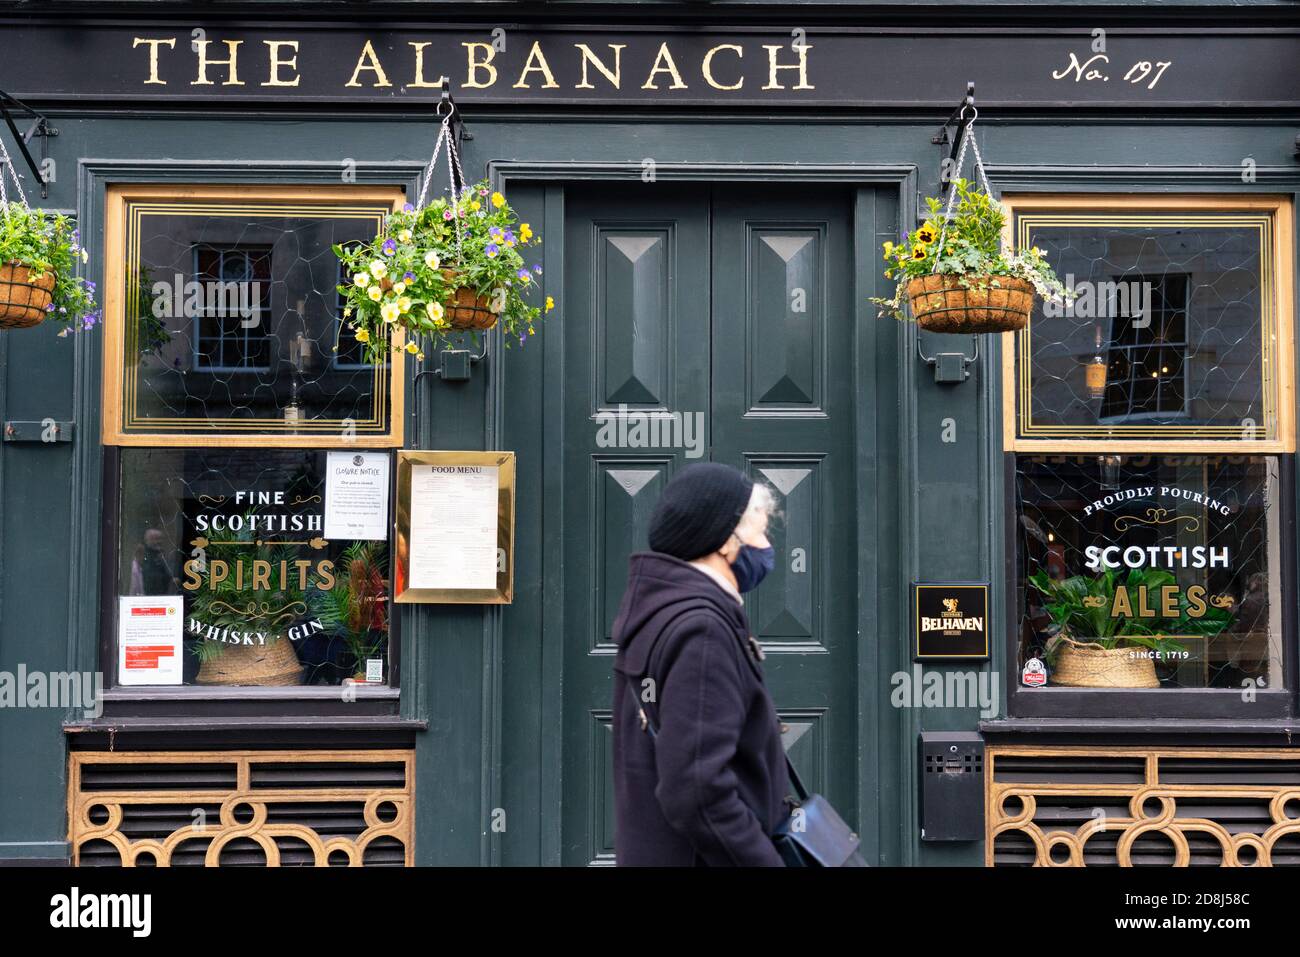 Edinburgh,Scotland, UK. 30 October 2020. With Edinburgh remaining in Tier 3 (Level 3) lockdown bars and restaurants remain severely restricted in business hours with many remaining closed and boarded up.  Pictured; The Albanach pub on the Royal Mile remains closed. Iain Masterton/Alamy Live News Stock Photo